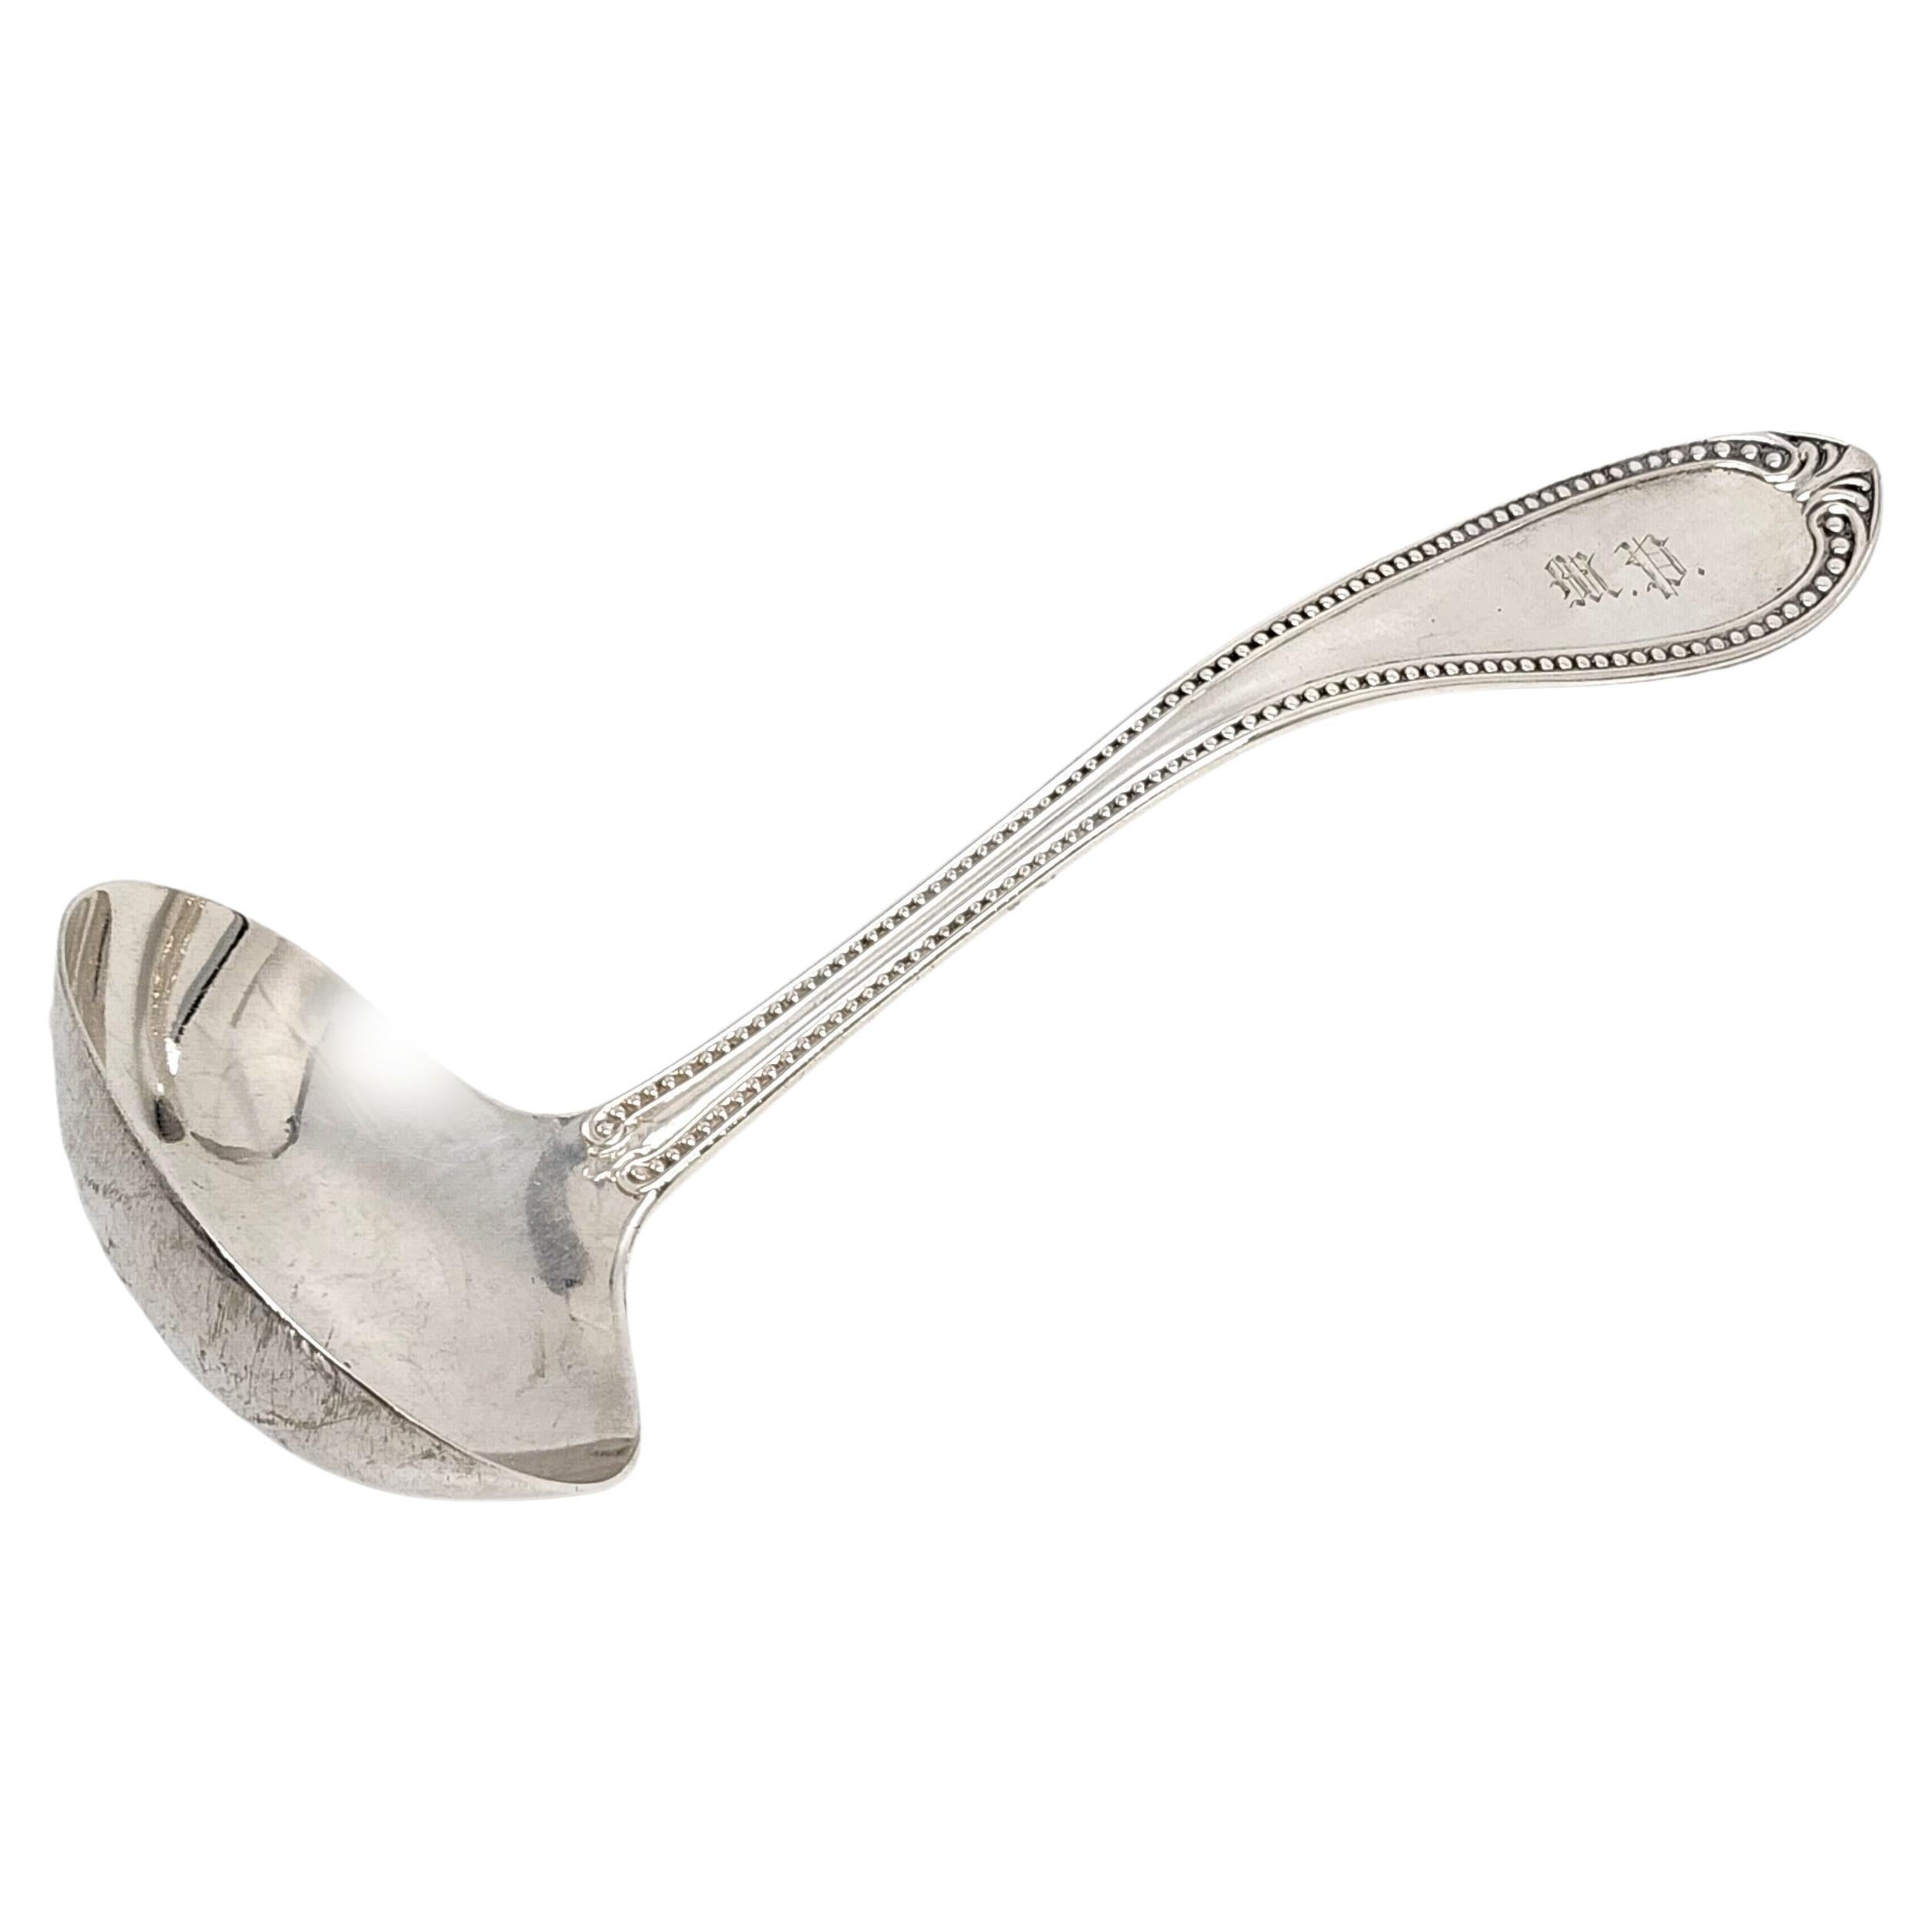 John Polhamus for Tiffany & Co Sterling Silver Bead Ladle with Monogram For Sale